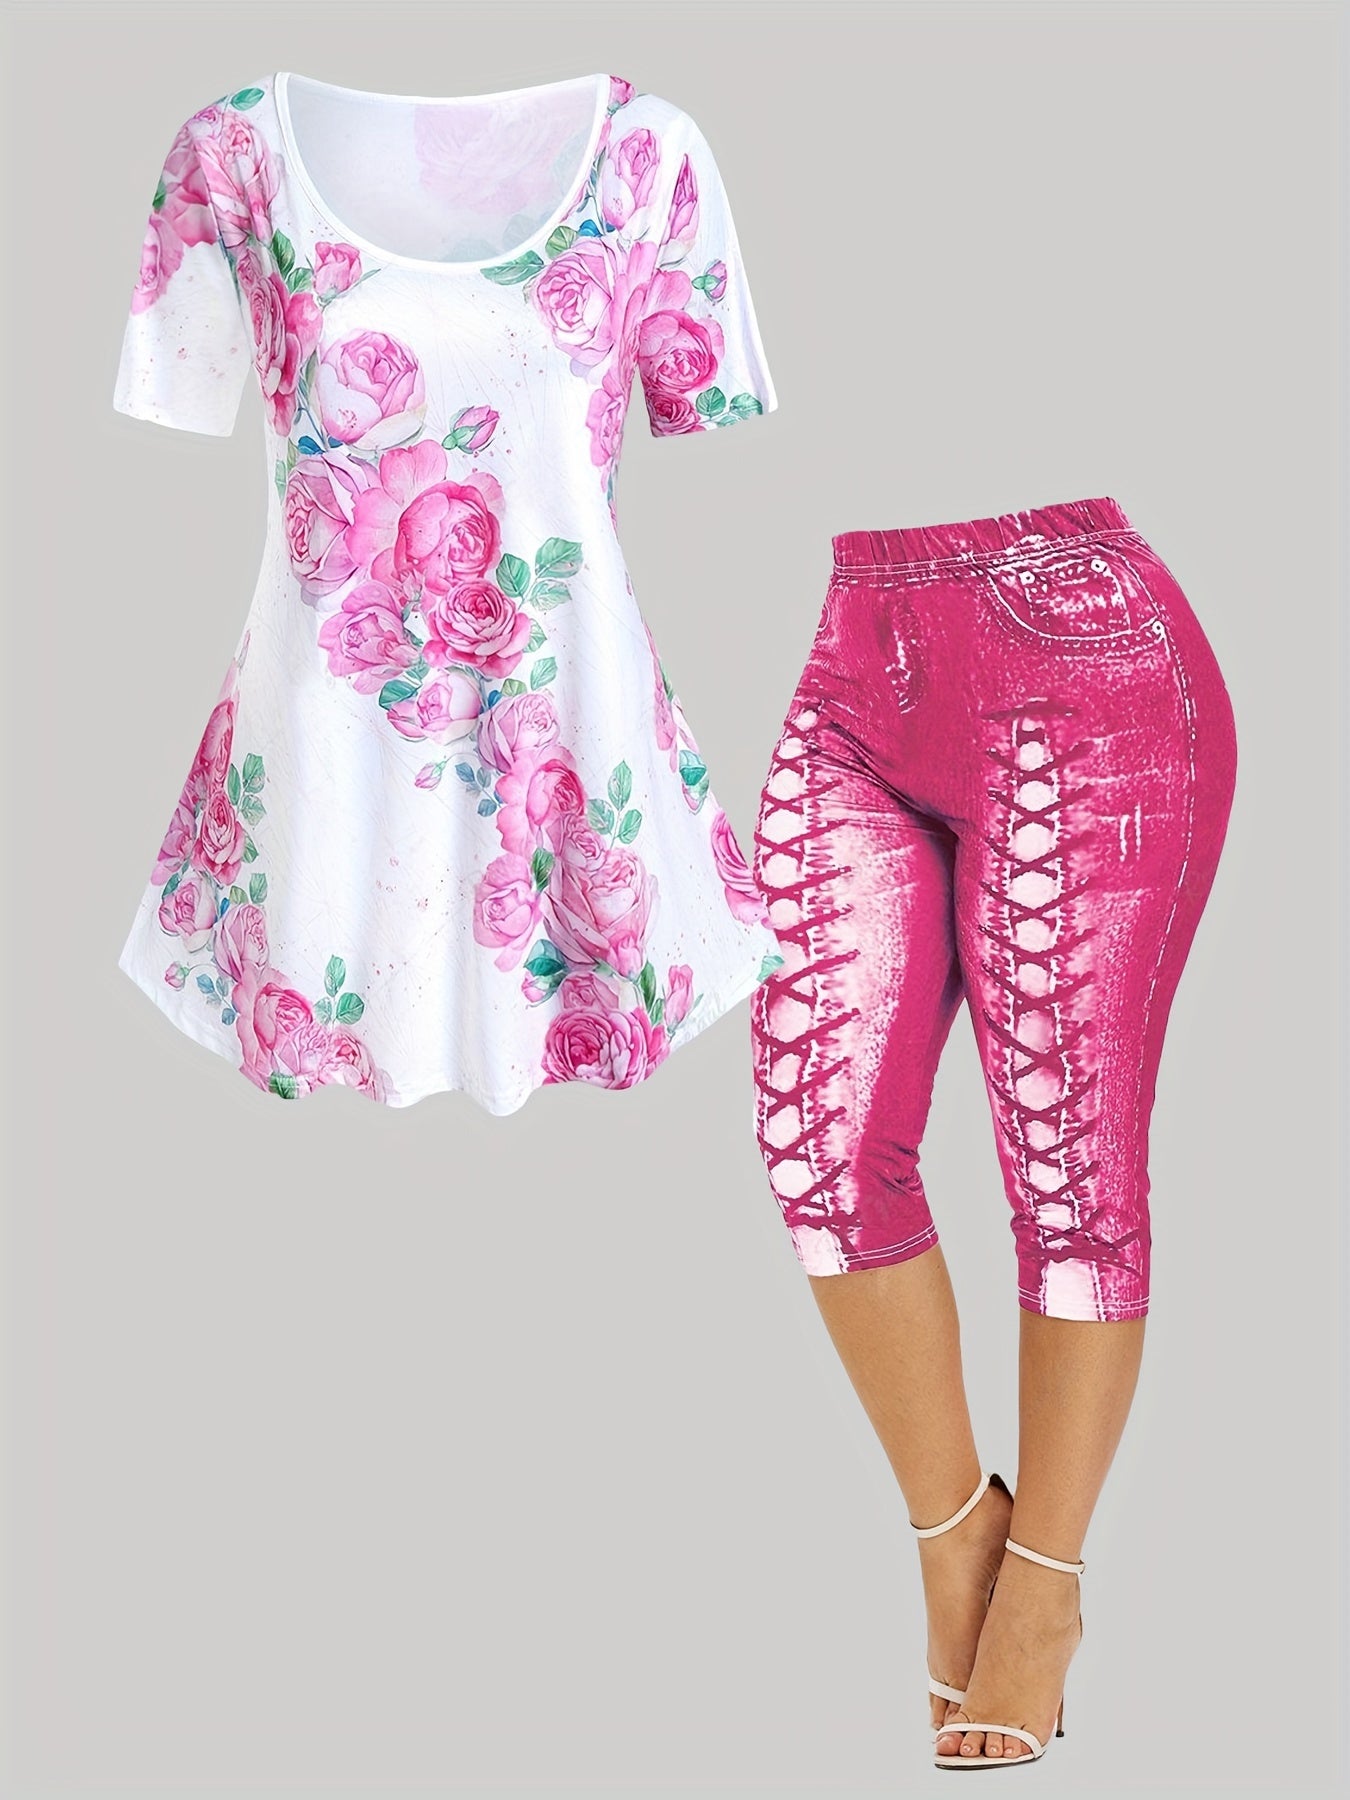 "Floral Print Casual Two-piece Set: Short Sleeve Top & Elastic Waist Pants for Women's Clothing"